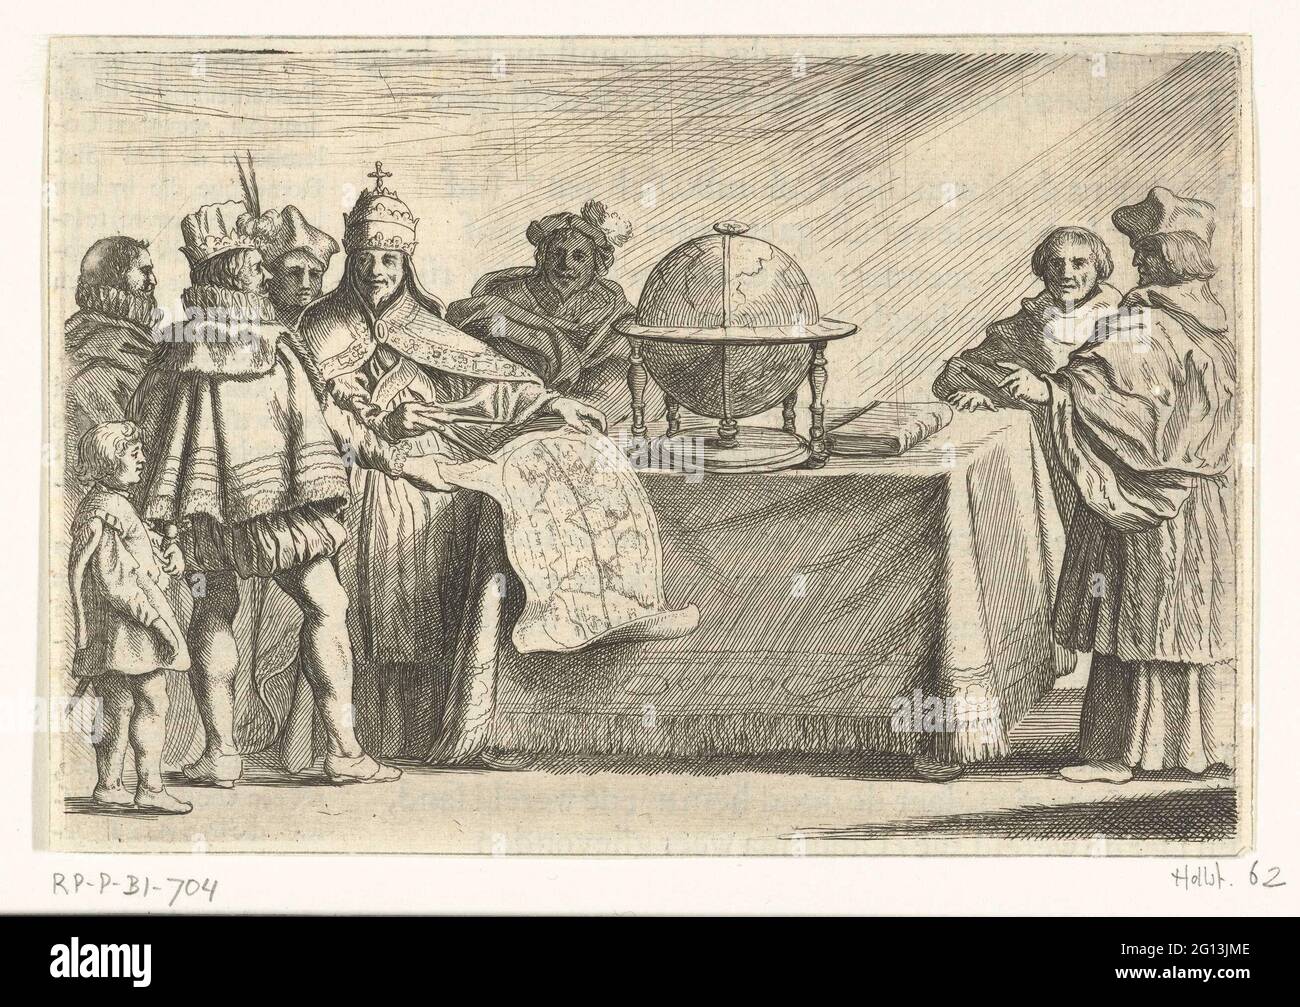 Columbus at the pope. Christoffel Columbus and the pope consult to map of the world, at a table on which a globe. Other scholars are also present, approx. 1500 printed on the back with text in Dutch. Stock Photo